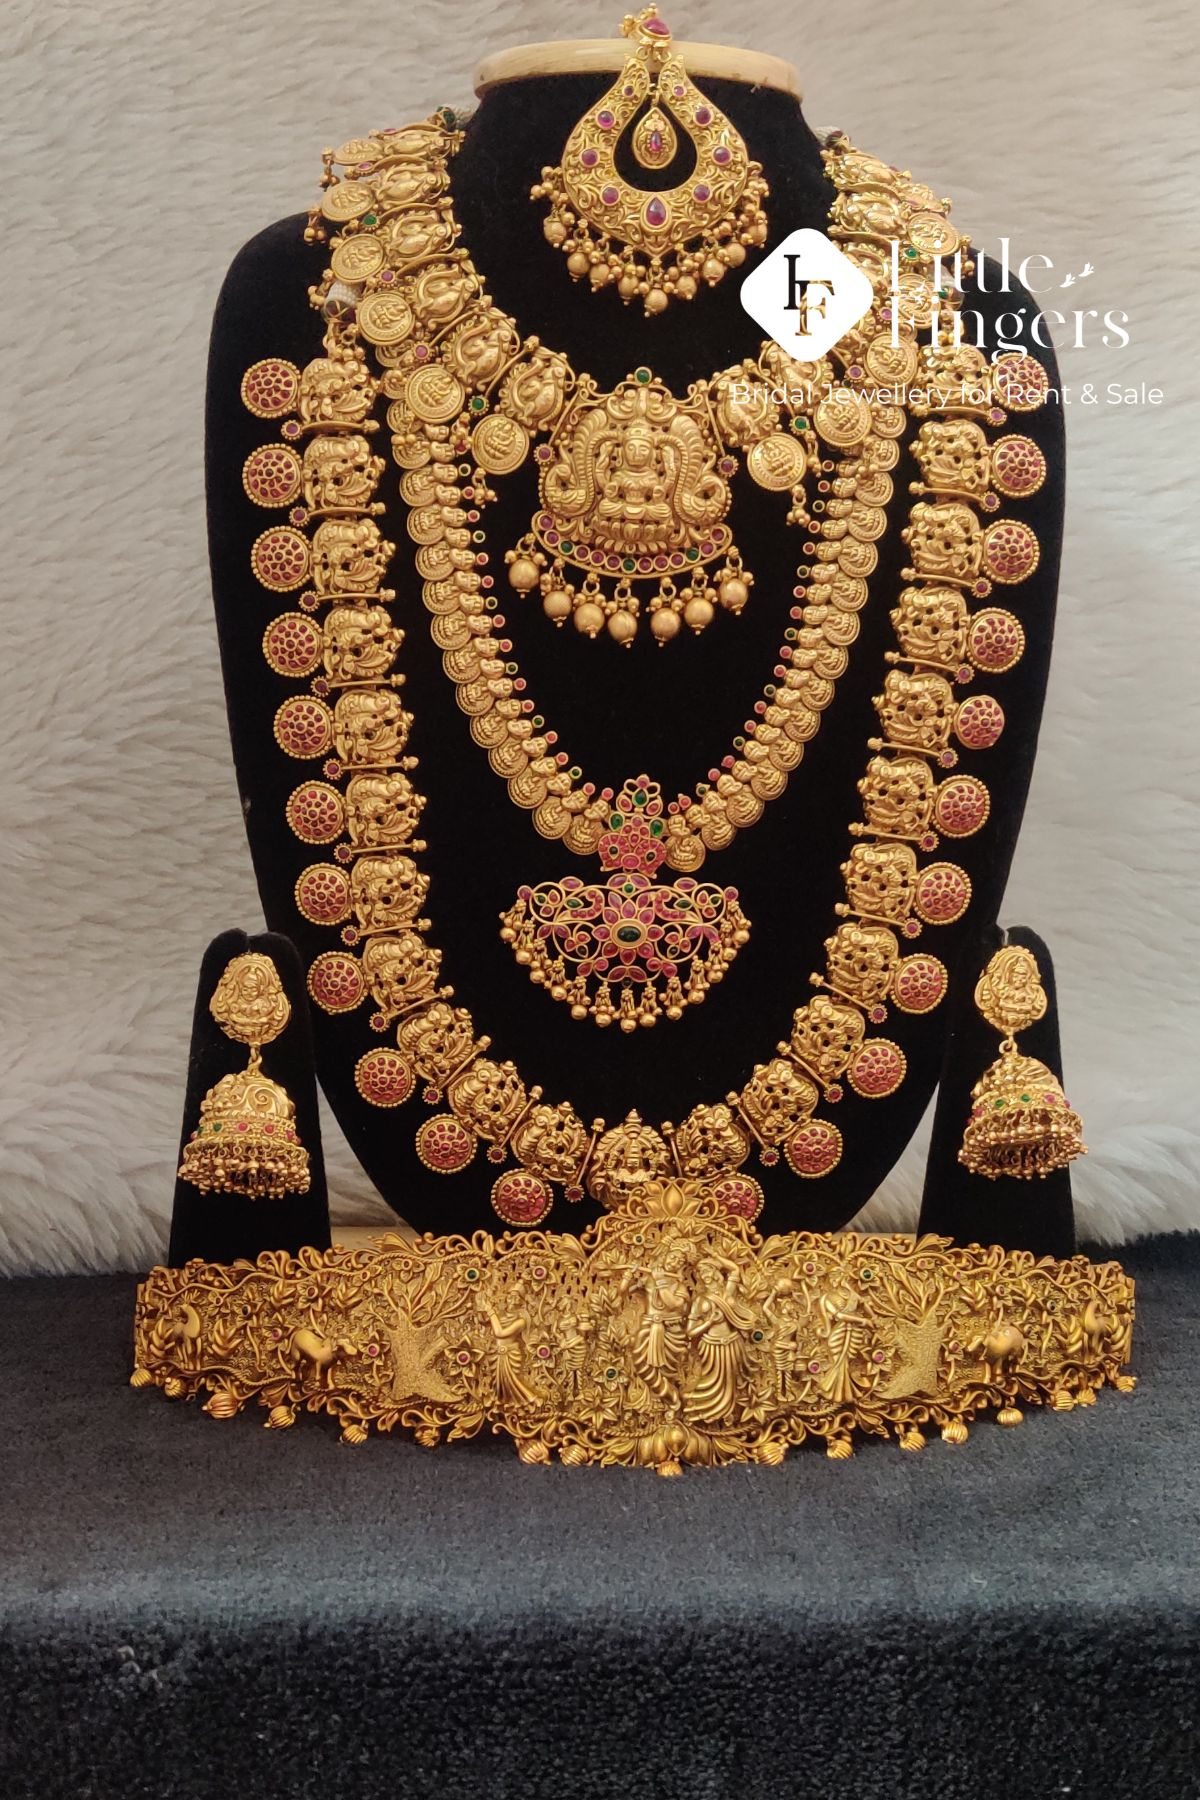 Antique With Gold Finish Bridal Jewellery for rent online - Little Fingers  India